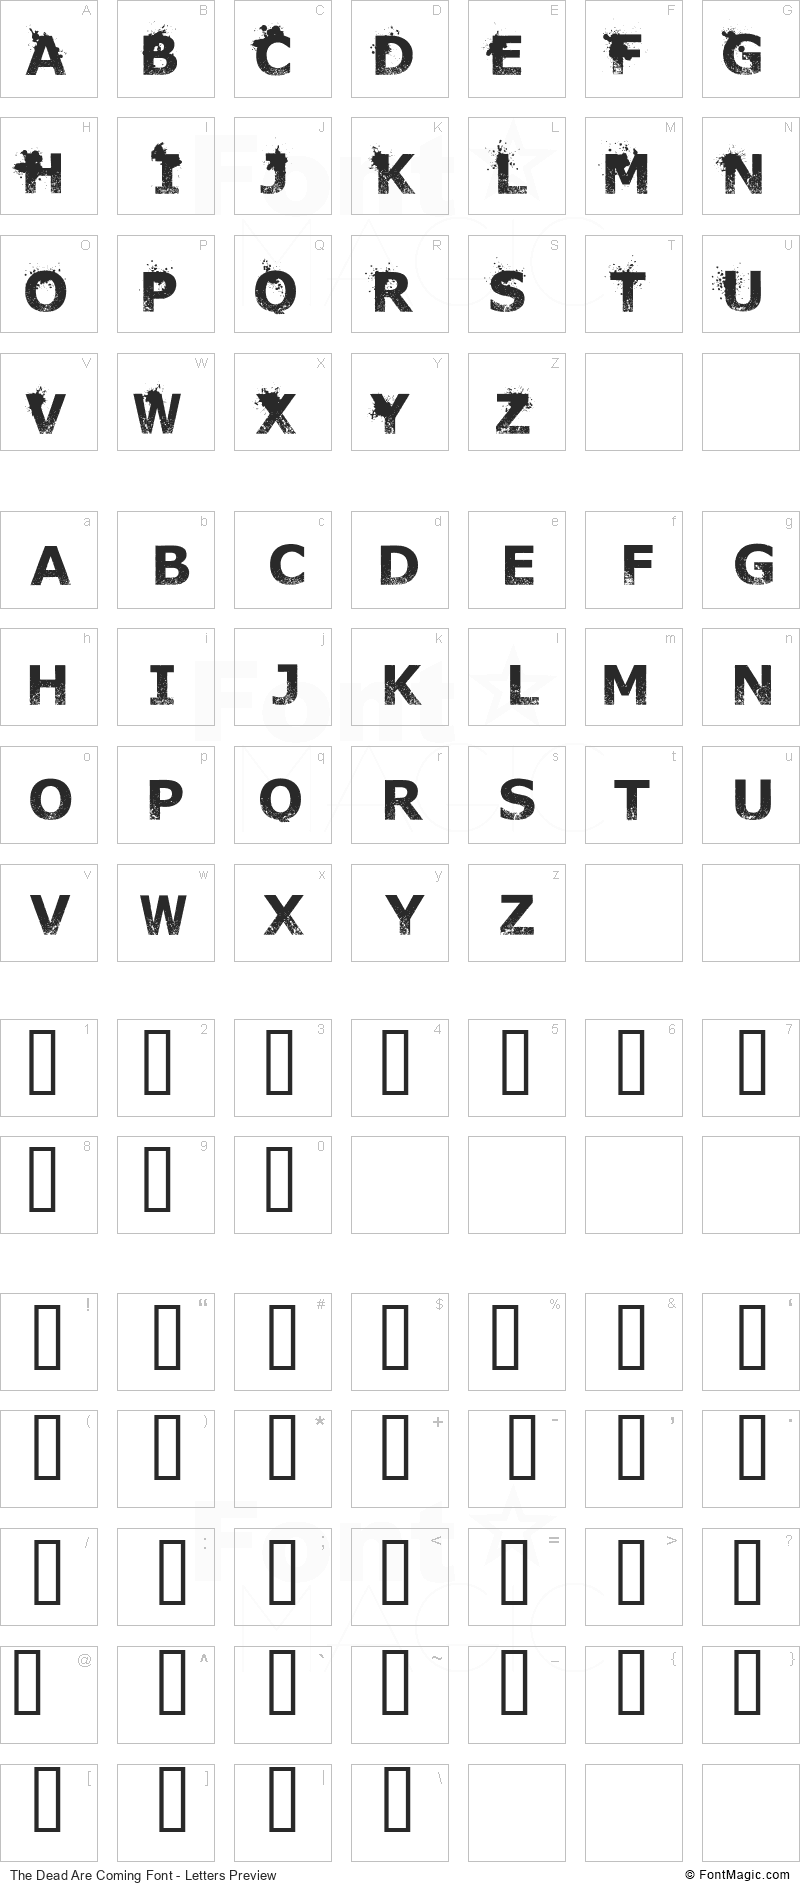 The Dead Are Coming Font - All Latters Preview Chart